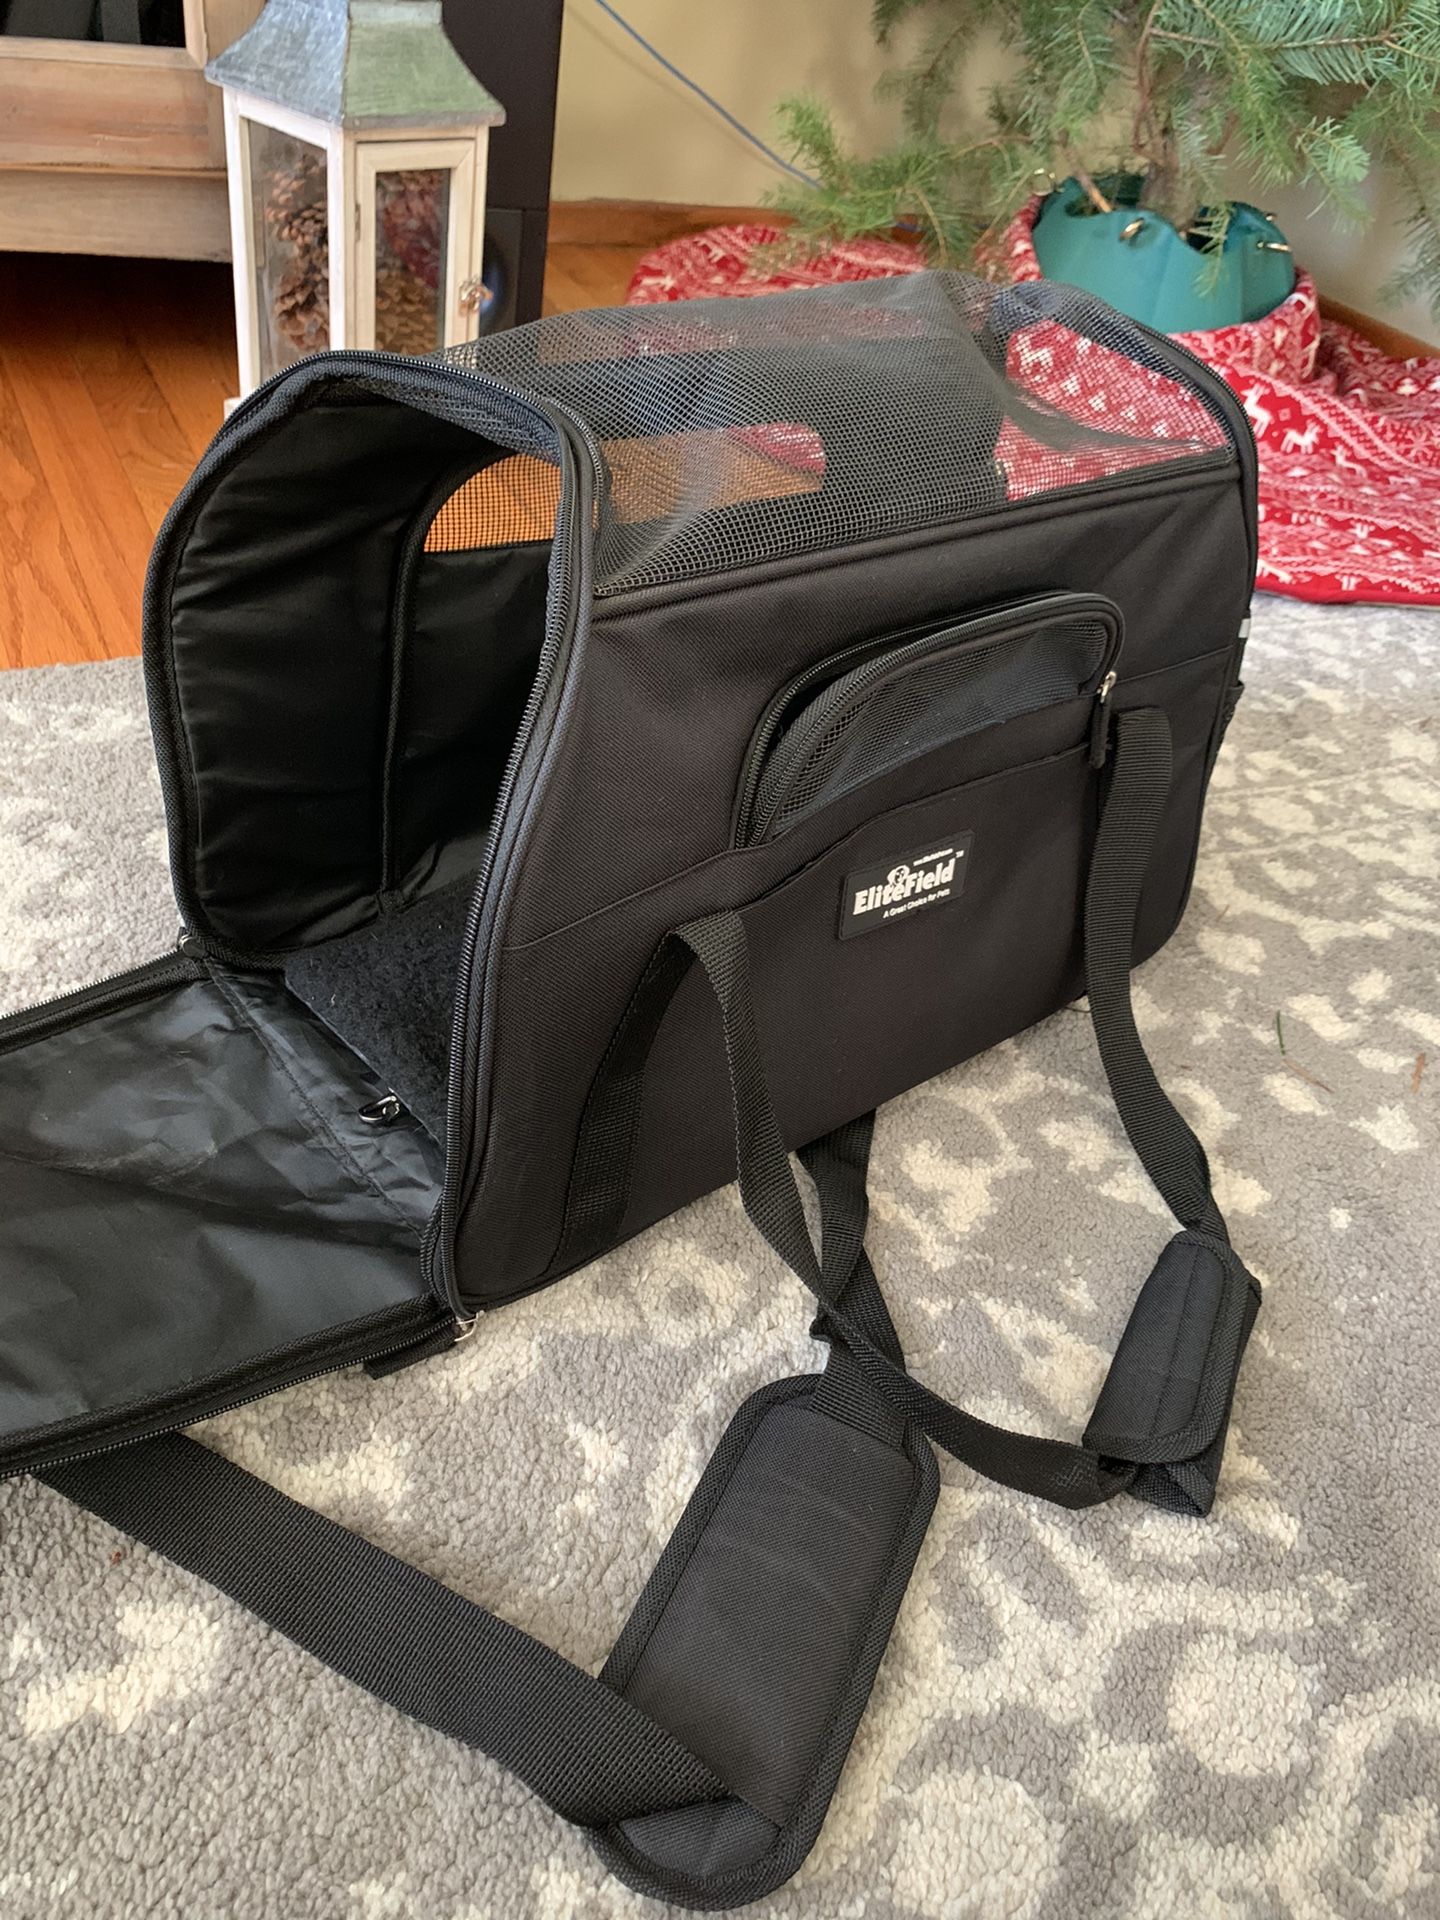 Medium Dog Carrier Used Once